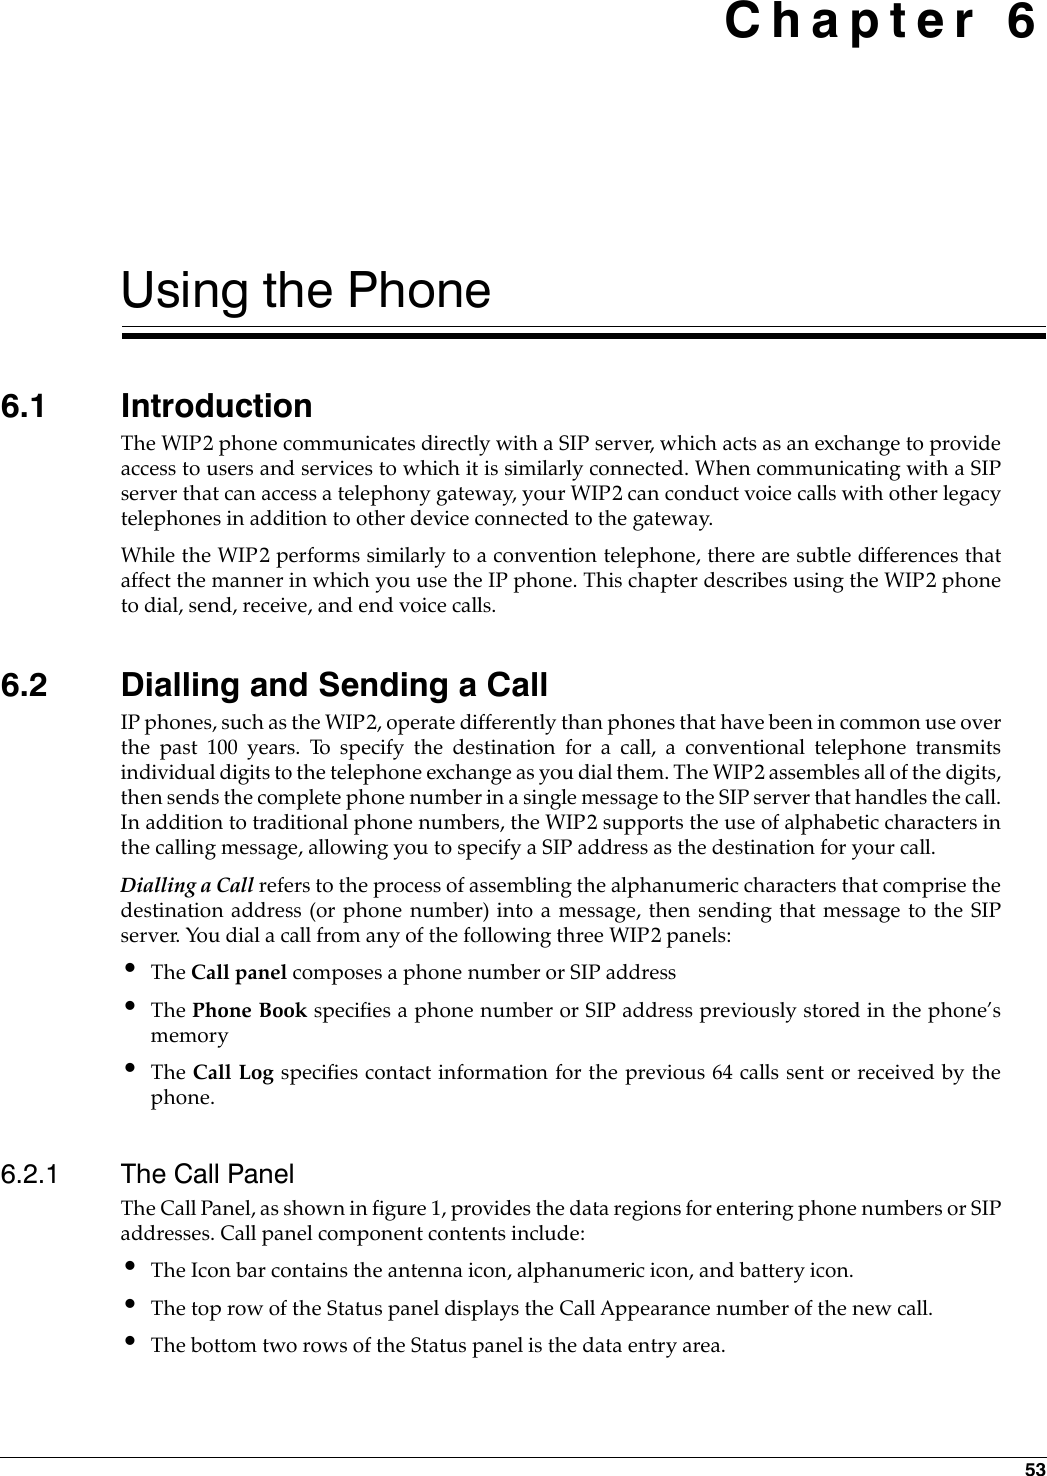 53 Chapter 6Using the Phone6.1 IntroductionThe WIP2 phone communicates directly with a SIP server, which acts as an exchange to provideaccess to users and services to which it is similarly connected. When communicating with a SIPserver that can access a telephony gateway, your WIP2 can conduct voice calls with other legacytelephones in addition to other device connected to the gateway.While the WIP2 performs similarly to a convention telephone, there are subtle differences thataffect the manner in which you use the IP phone. This chapter describes using the WIP2 phoneto dial, send, receive, and end voice calls.6.2 Dialling and Sending a CallIP phones, such as the WIP2, operate differently than phones that have been in common use overthe past 100 years. To specify the destination for a call, a conventional telephone transmitsindividual digits to the telephone exchange as you dial them. The WIP2 assembles all of the digits,then sends the complete phone number in a single message to the SIP server that handles the call.In addition to traditional phone numbers, the WIP2 supports the use of alphabetic characters inthe calling message, allowing you to specify a SIP address as the destination for your call.Dialling a Call refers to the process of assembling the alphanumeric characters that comprise thedestination address (or phone number) into a message, then sending that message to the SIPserver. You dial a call from any of the following three WIP2 panels:•The Call panel composes a phone number or SIP address•The Phone Book specifies a phone number or SIP address previously stored in the phone’smemory•The Call Log specifies contact information for the previous 64 calls sent or received by thephone. 6.2.1 The Call PanelThe Call Panel, as shown in figure 1, provides the data regions for entering phone numbers or SIPaddresses. Call panel component contents include:•The Icon bar contains the antenna icon, alphanumeric icon, and battery icon.•The top row of the Status panel displays the Call Appearance number of the new call.•The bottom two rows of the Status panel is the data entry area.